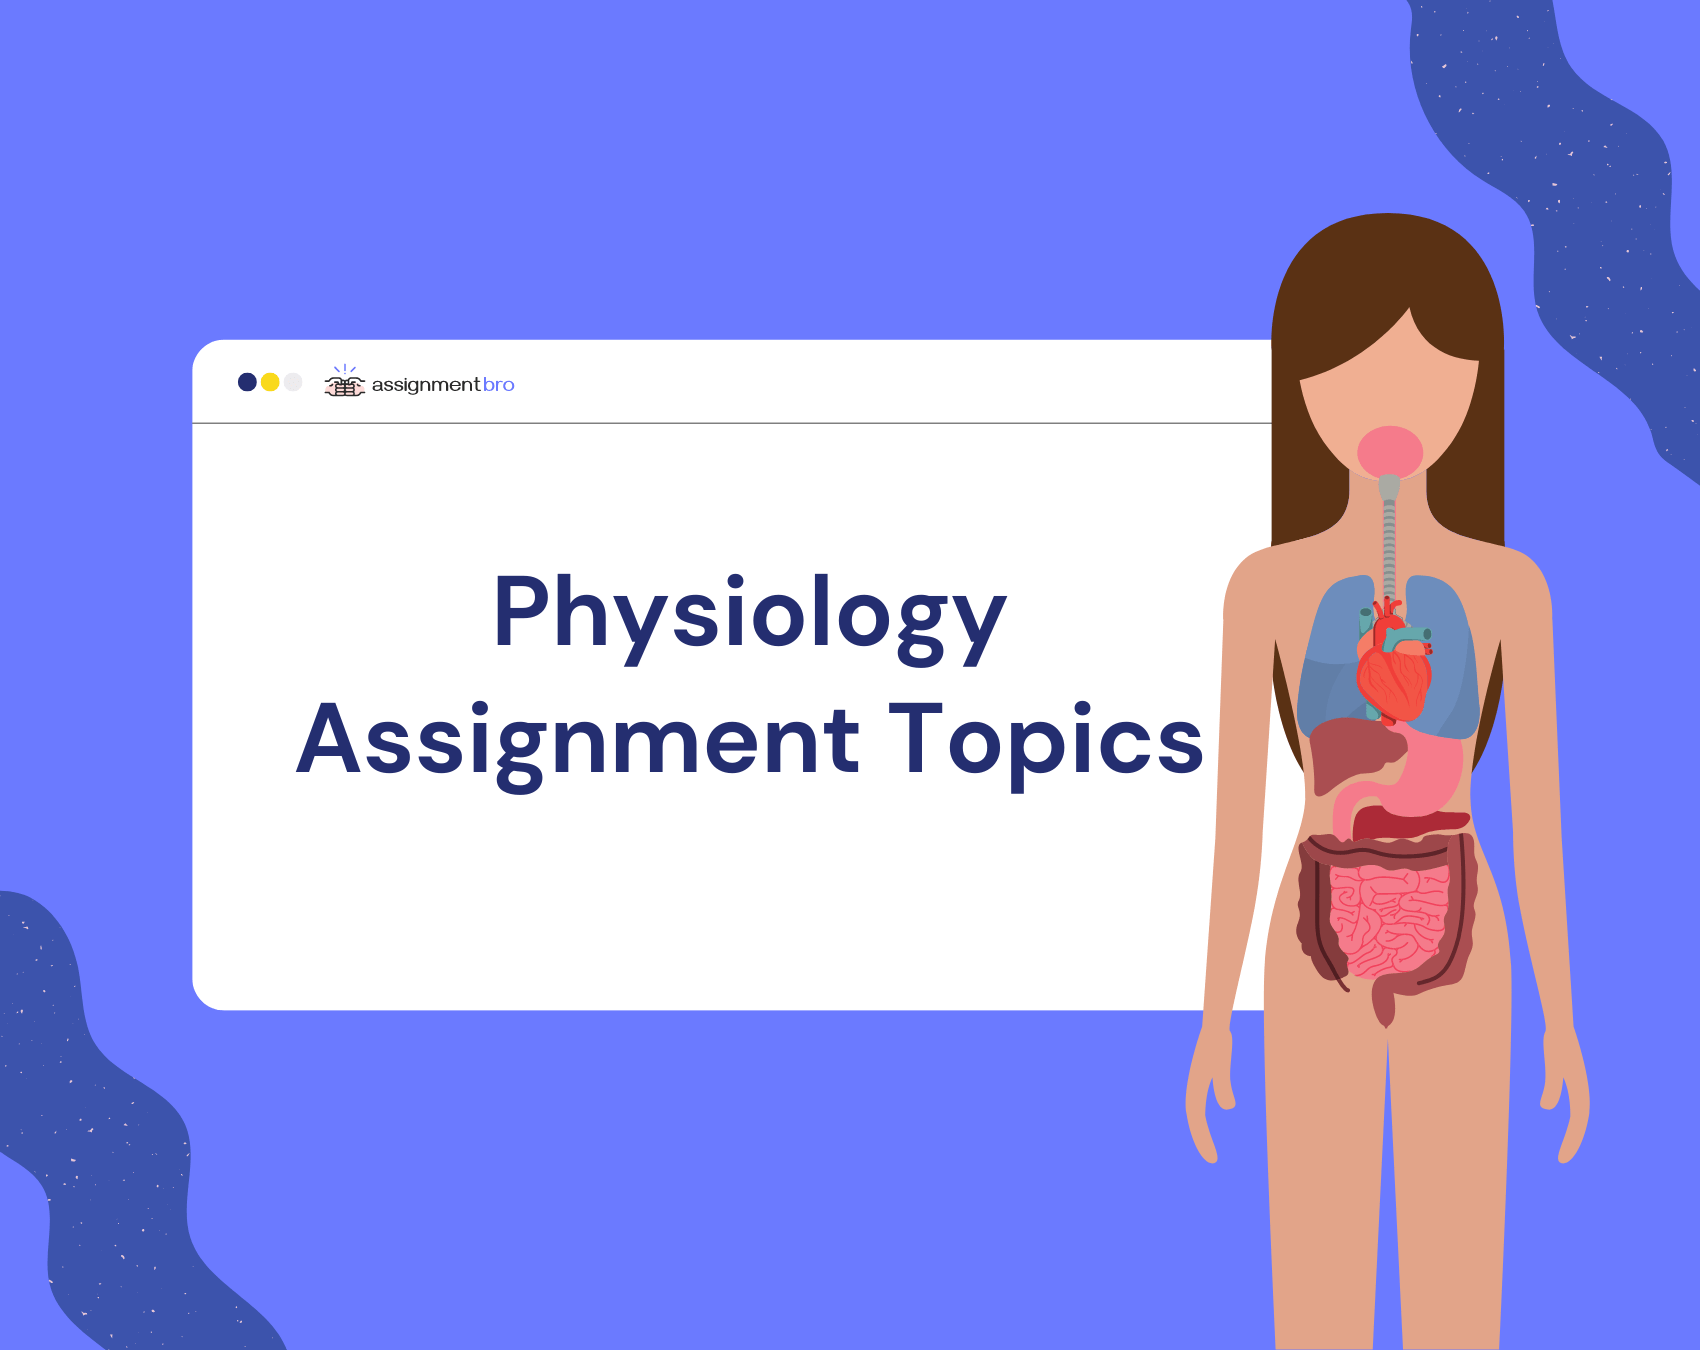 Physiology Assignment Topics